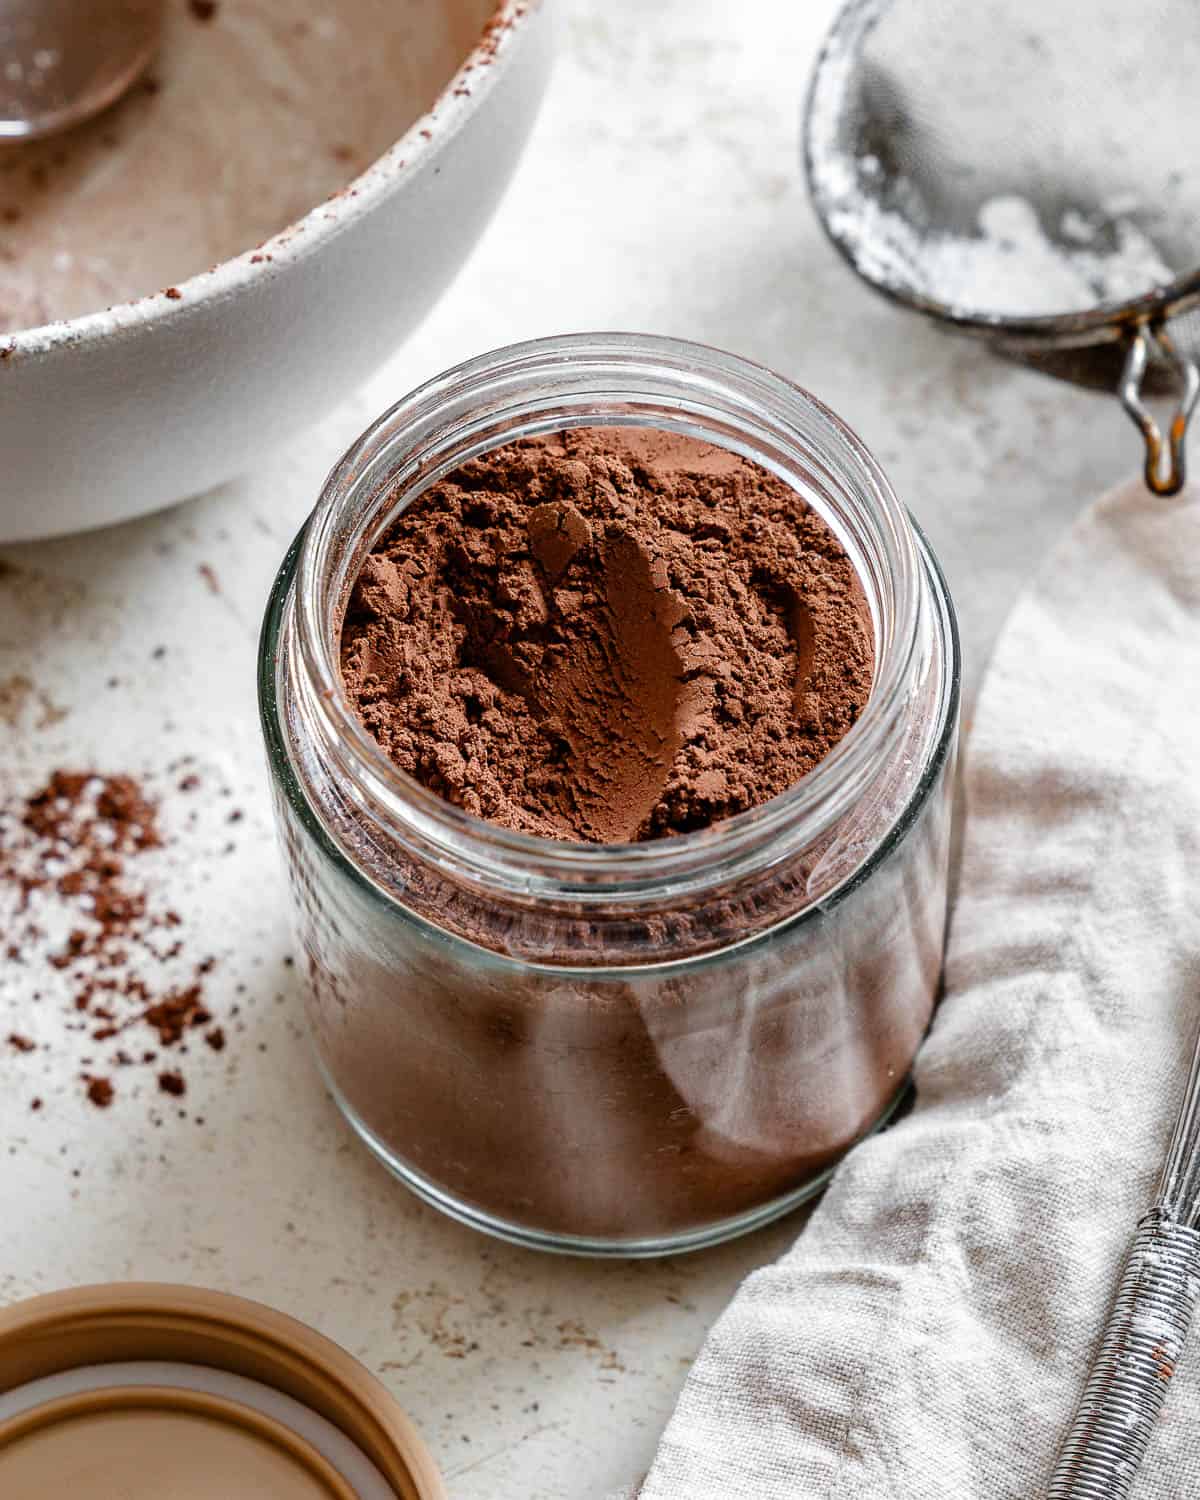 completed Homemade Vegan Hot Chocolate Mix on a white surface